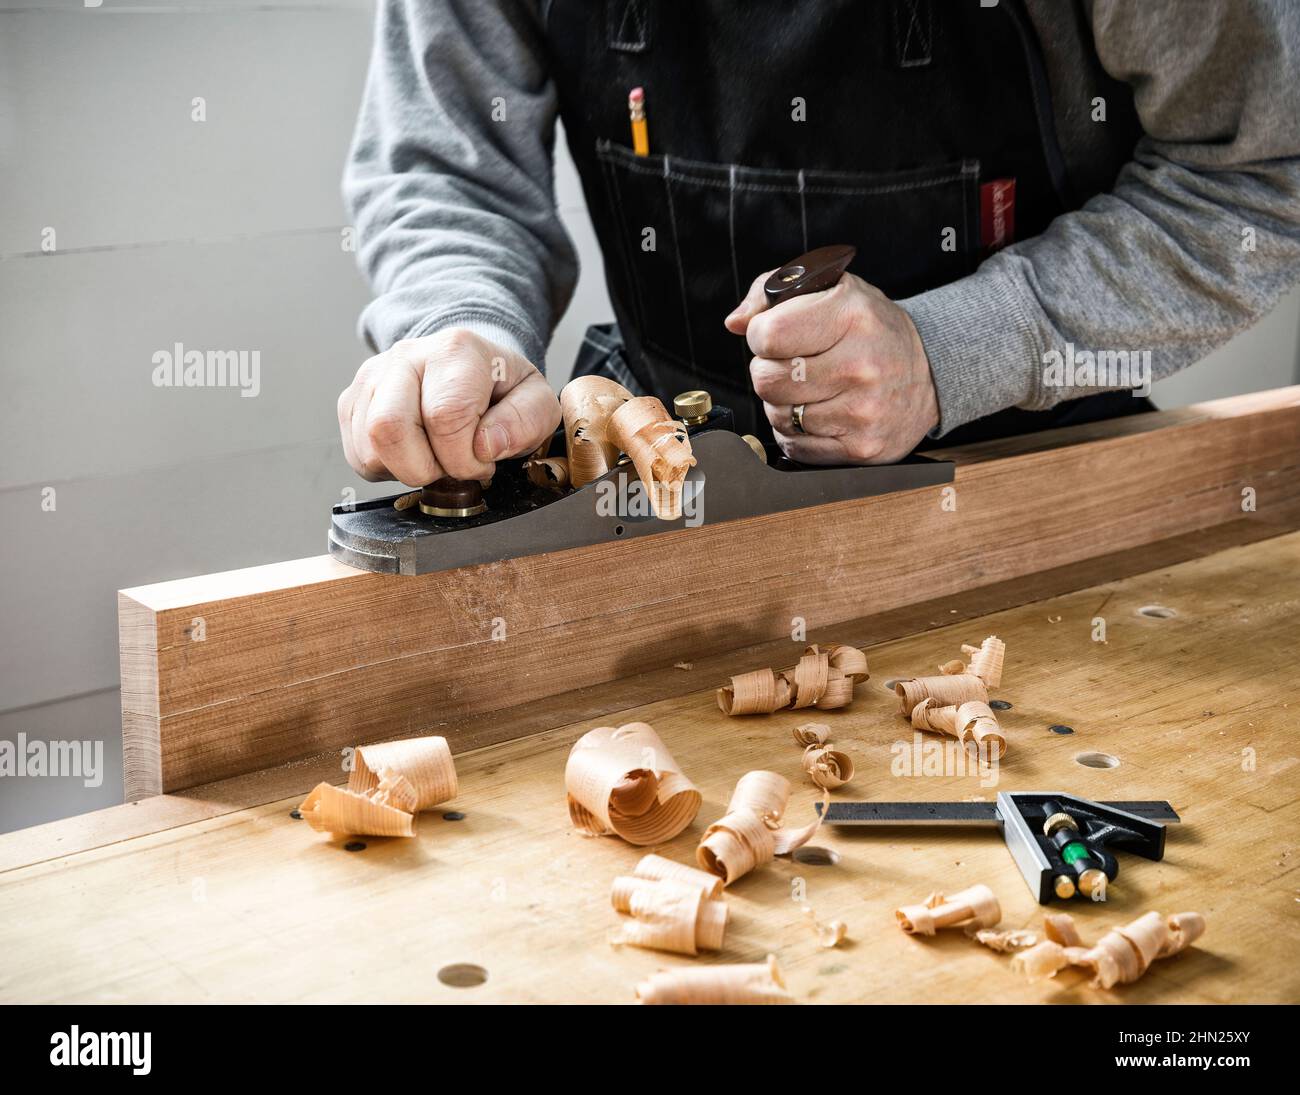 Woodworker hand planing with a low angle Jack Plane. Stock Photo